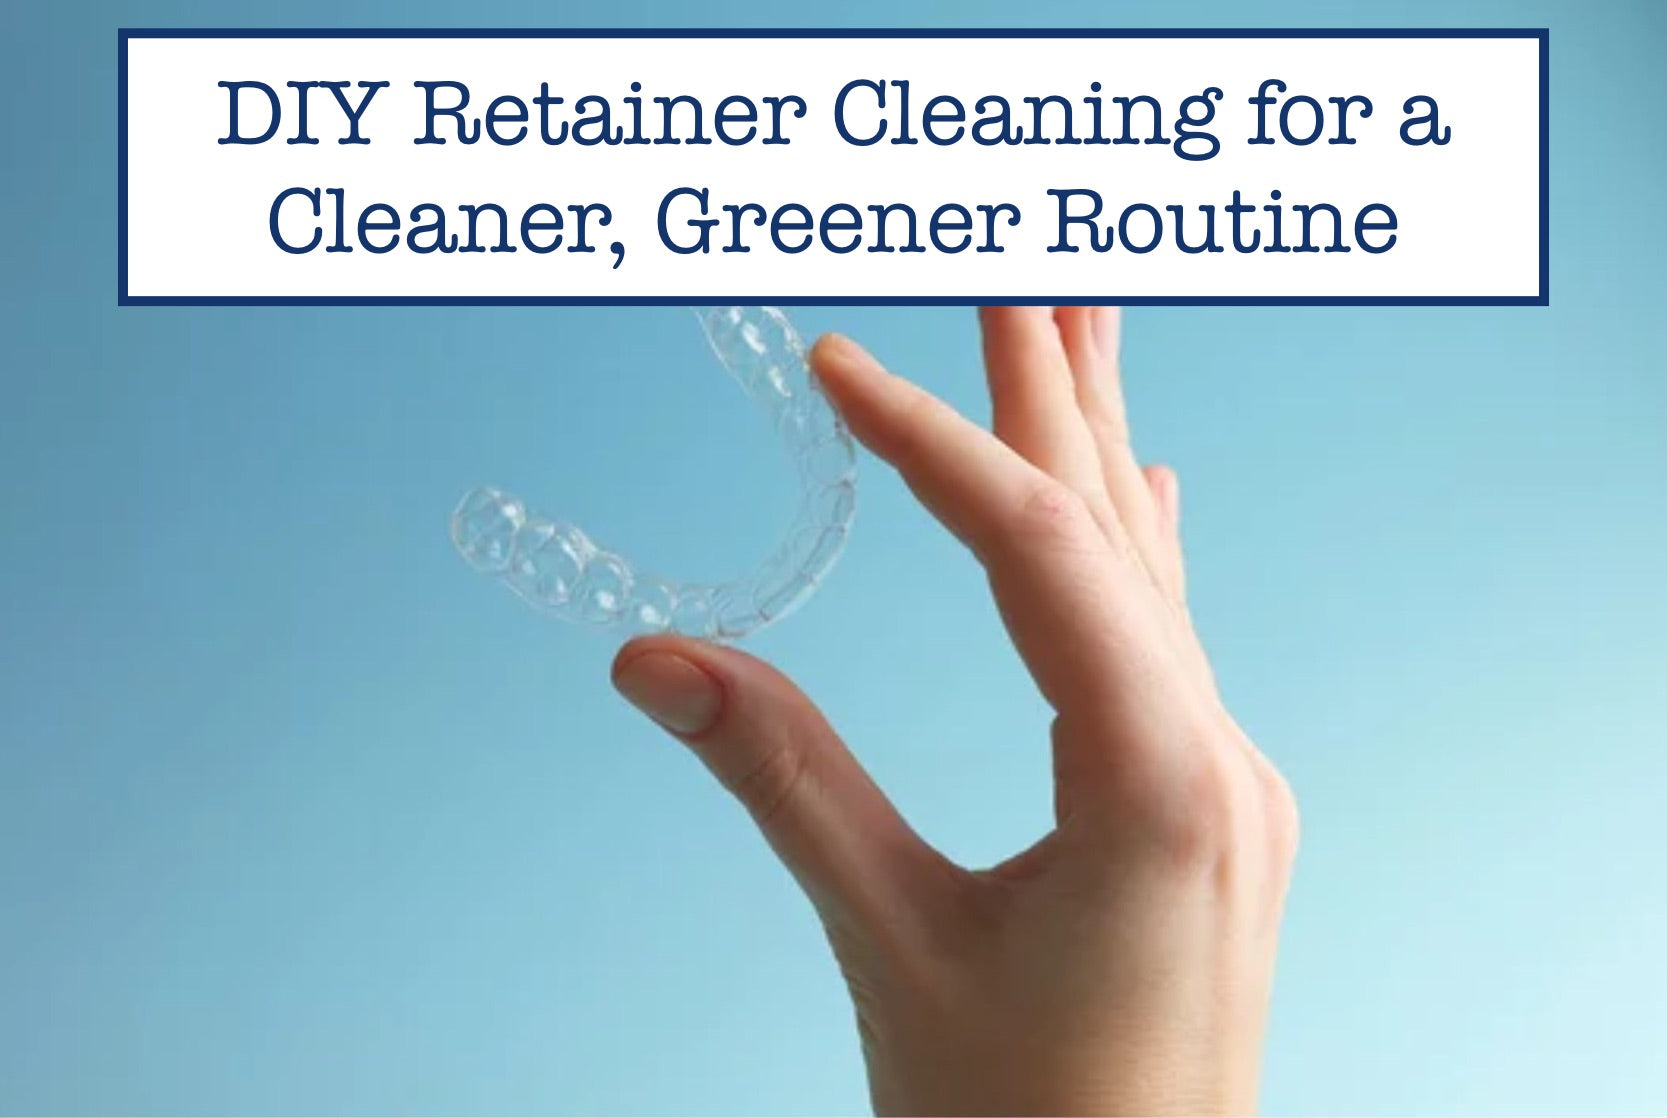 DIY Retainer Cleaning for a Cleaner, Greener Routine